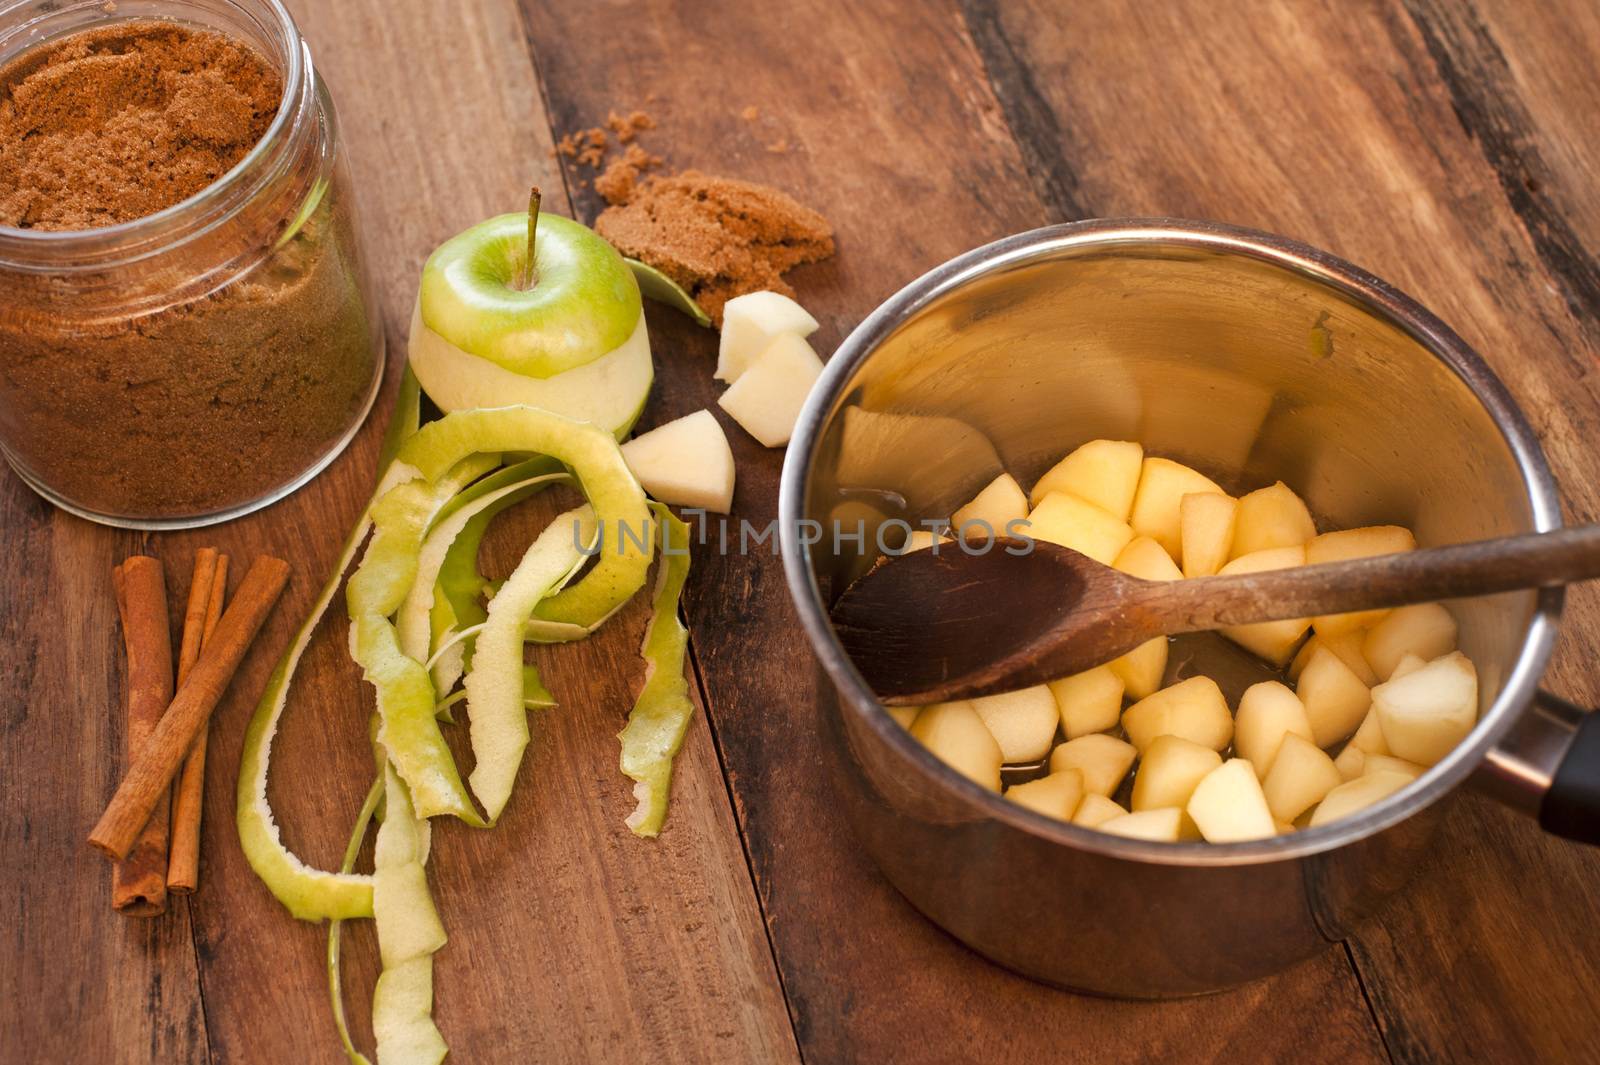 Preparing homemade apple and cinnamon sauce by stockarch